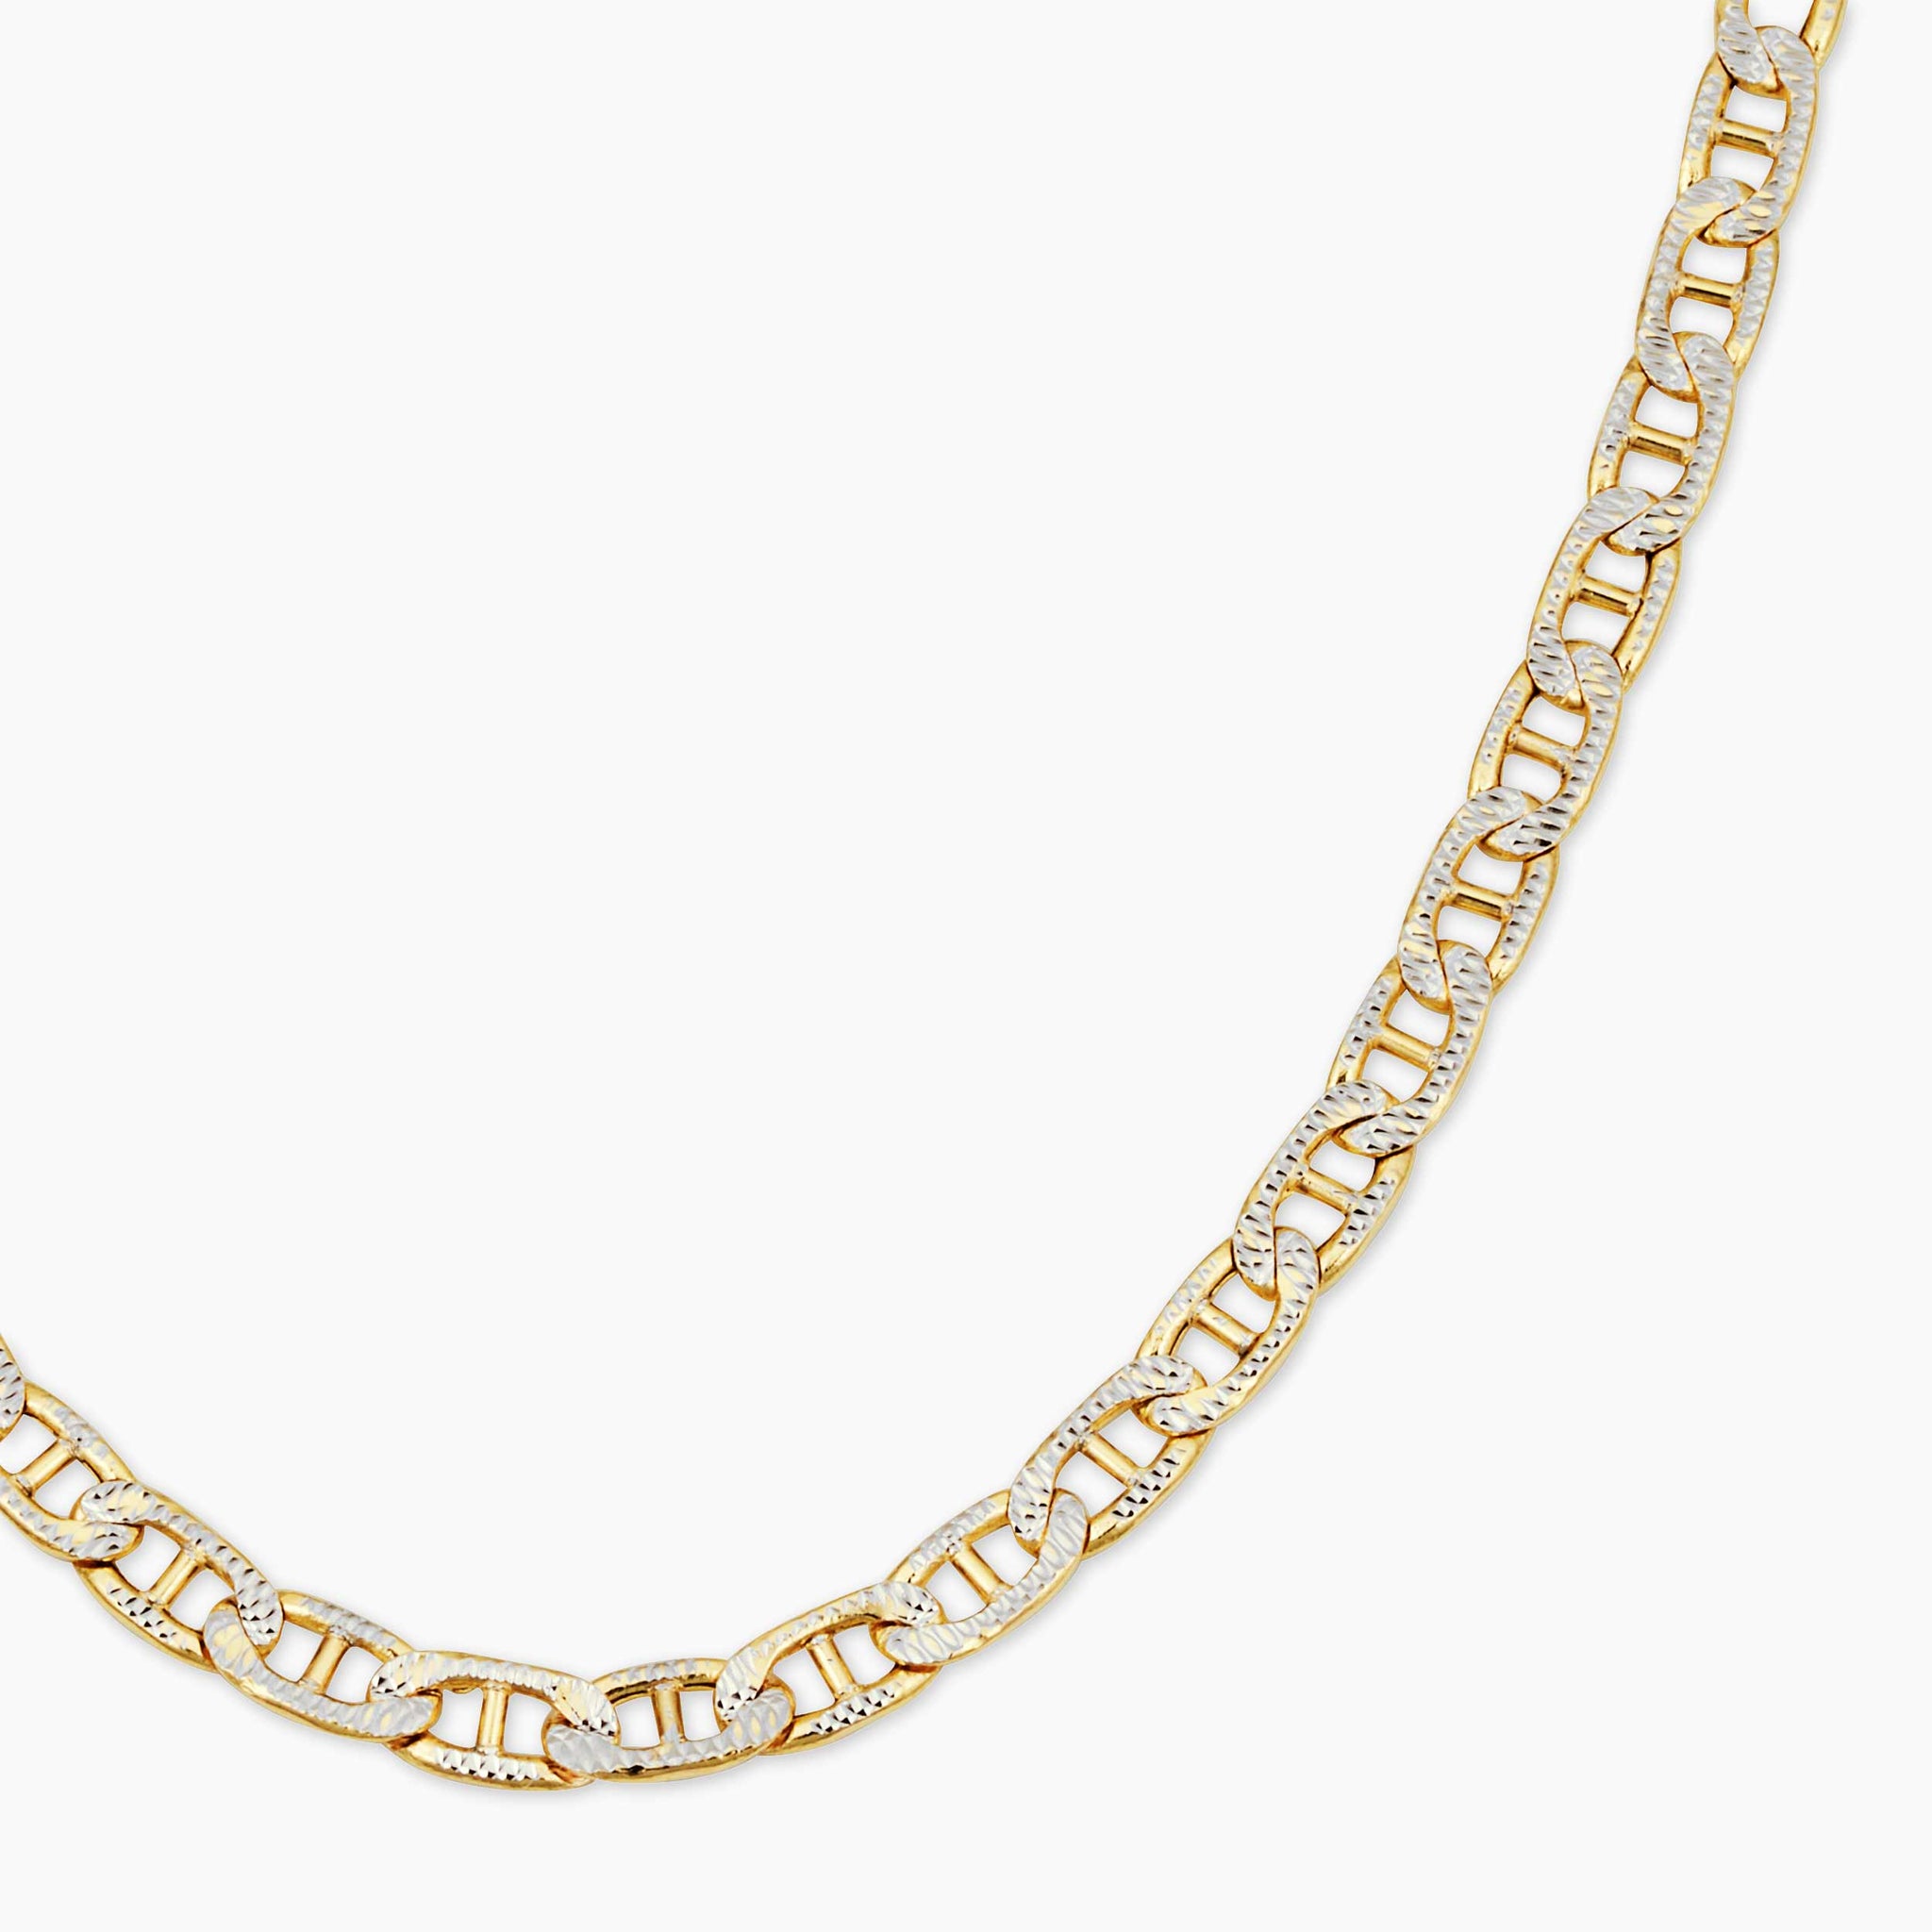 Roman Rope Necklace Yellow Gold / 14K Solid Gold / 16 | Real Gold Jewelry by Oradina